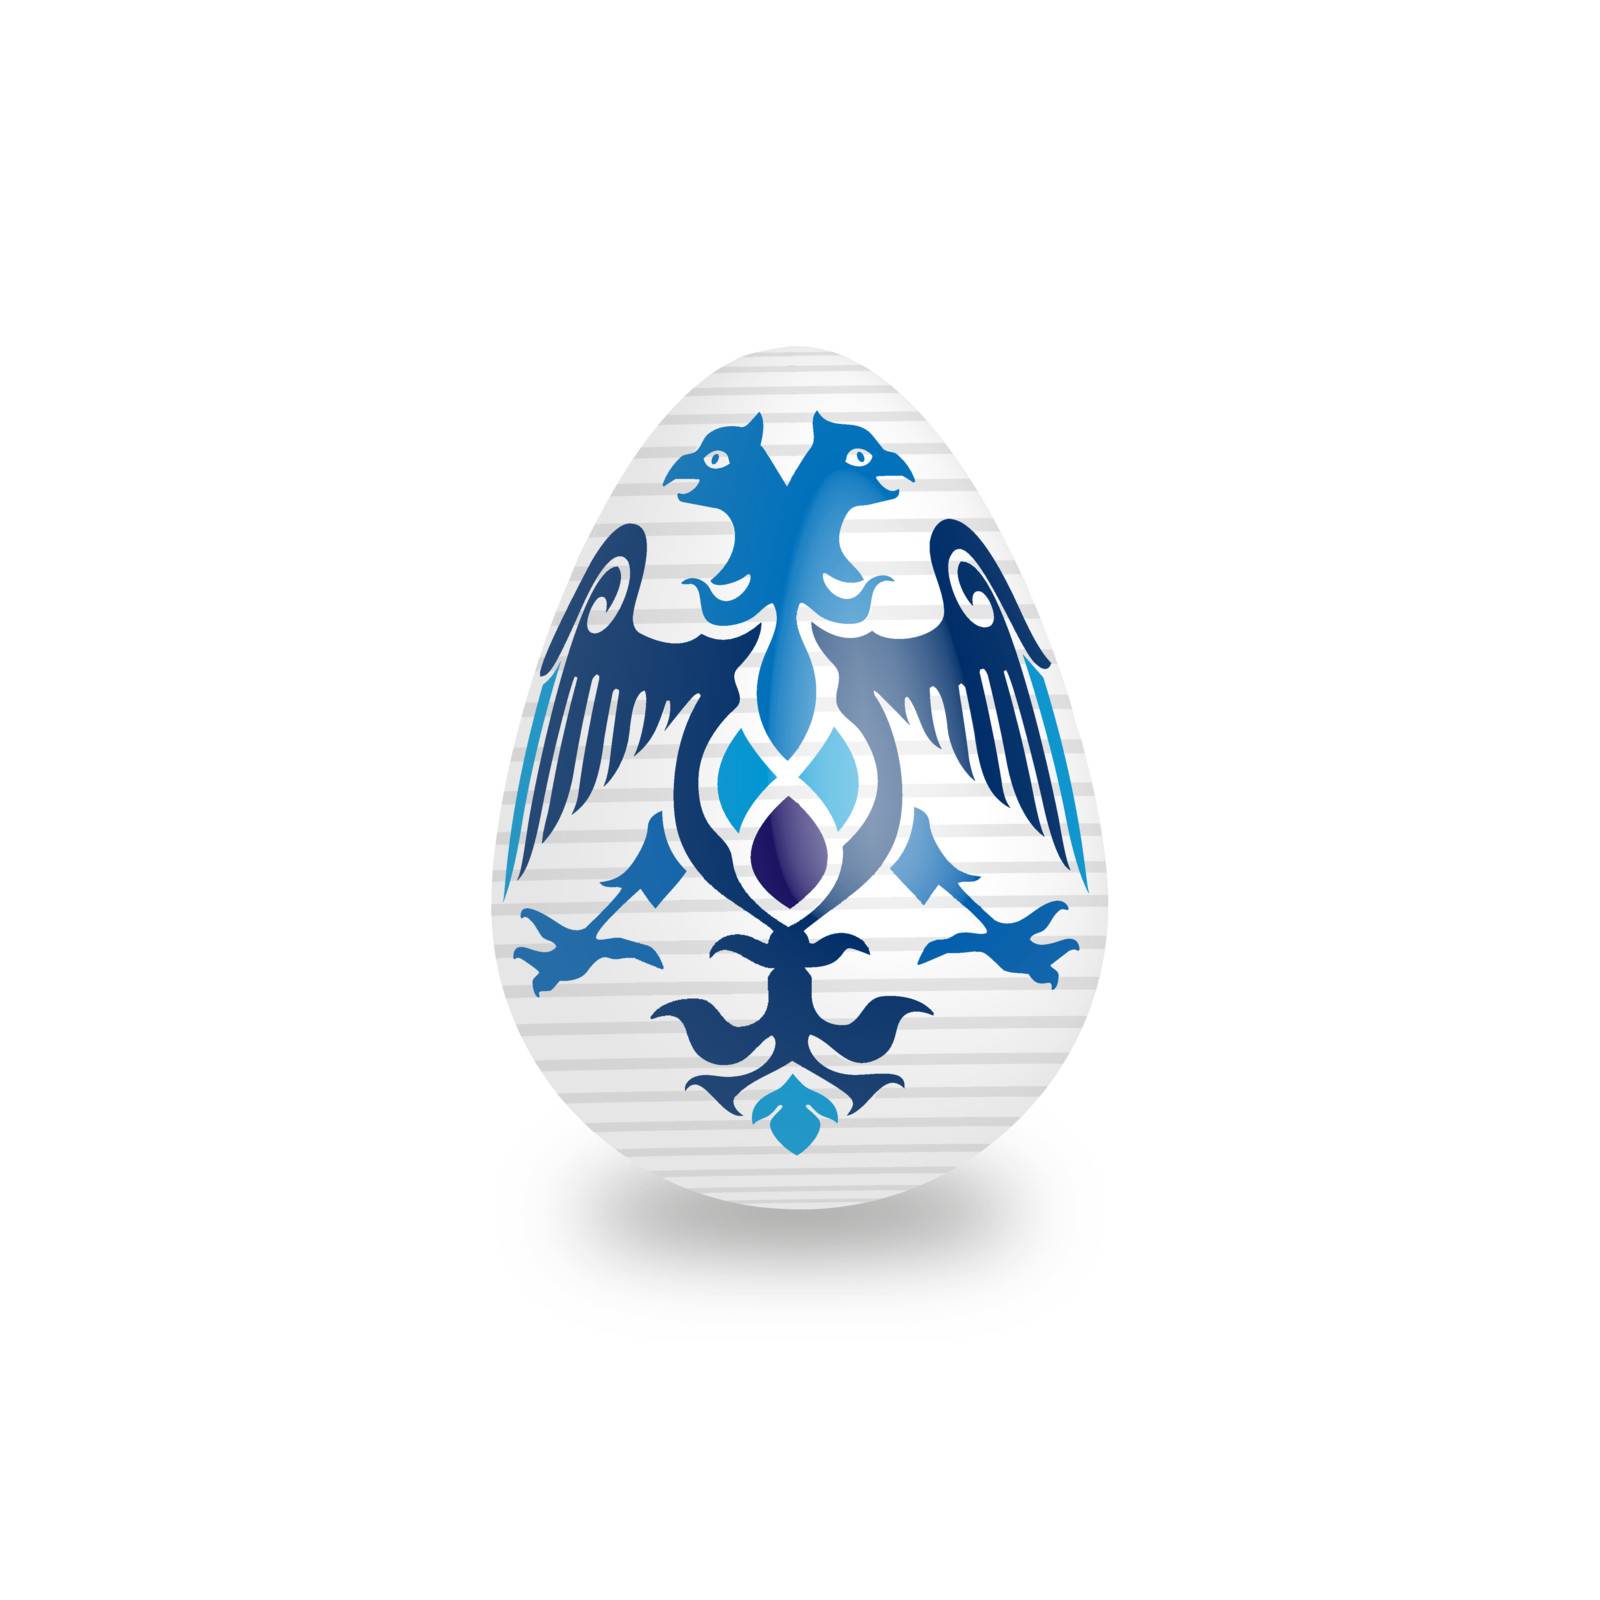 Decorated easter egg symbolizes the revival of